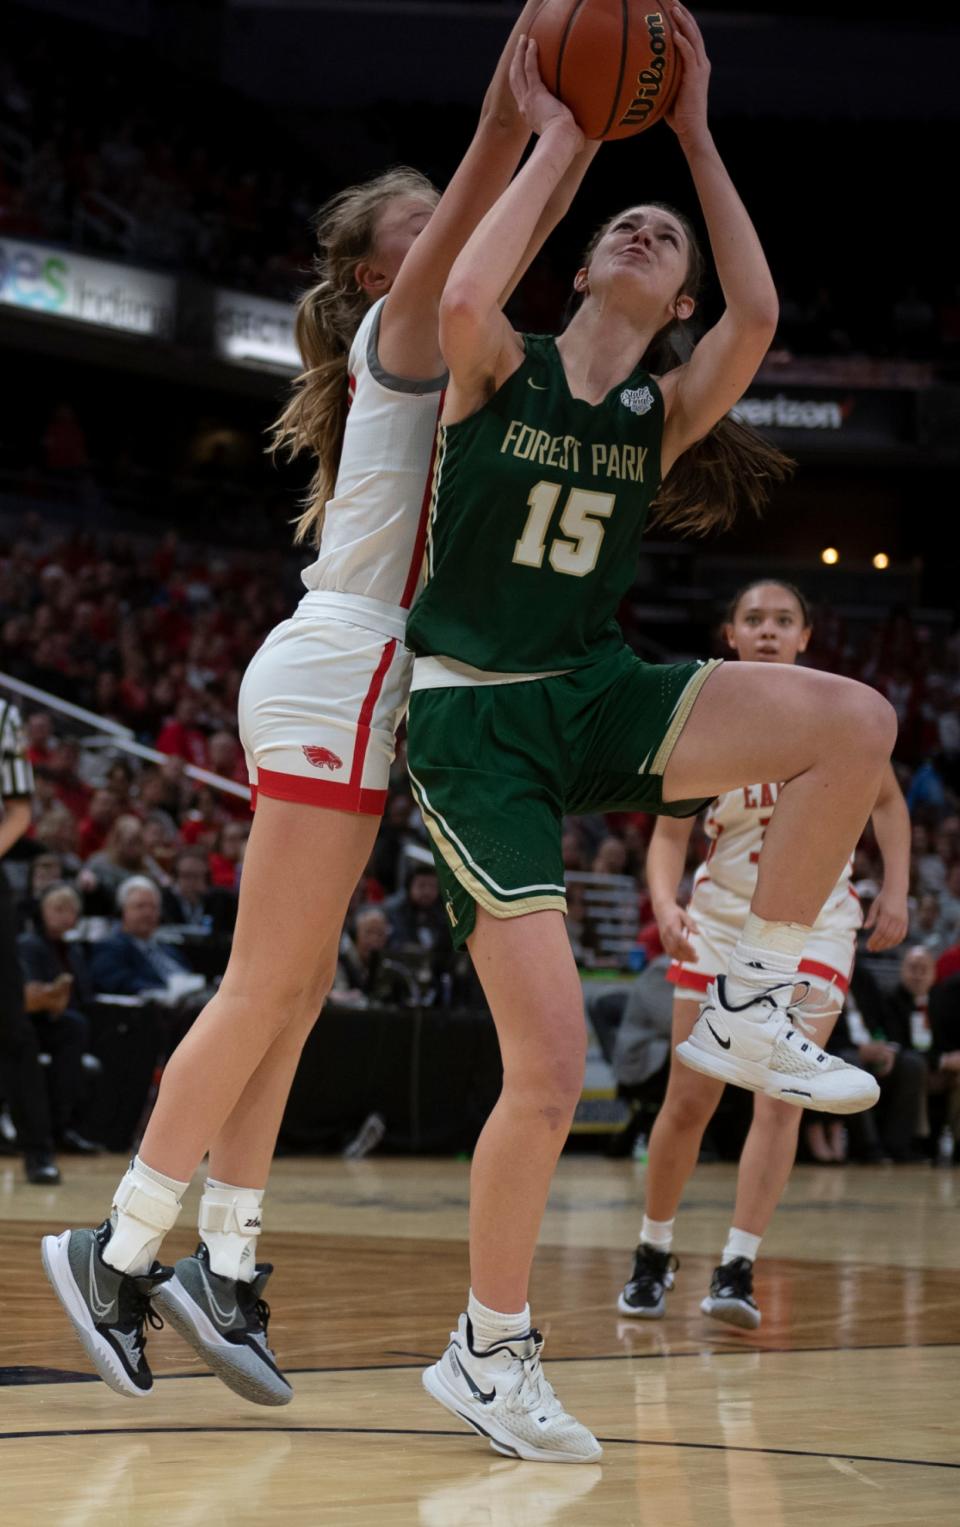 Forest Park's Amber Tretter (15) scores a layup as Frankton's Emma Sperry (10) guards during the IHSAA girls basketball Class 2A state championship at Gainbridge Fieldhouse in Indianapolis, Ind., Saturday afternoon, Feb. 26, 2022